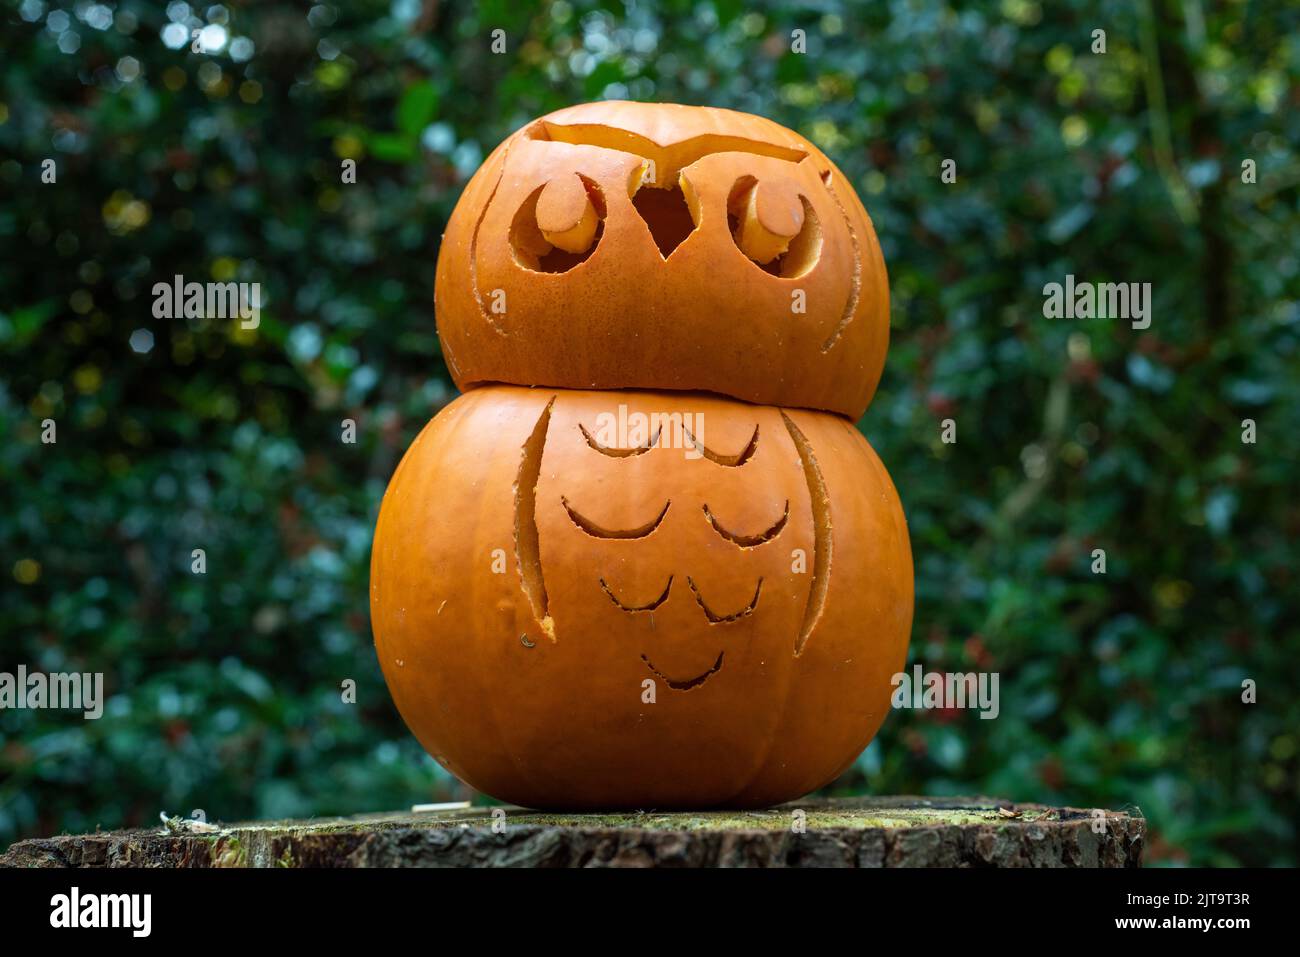 Sheffield, UK - 31 Oct 2019: Carved pumpkin or jack o lantern at Eccleshall Woods Halloween Trail Stock Photo